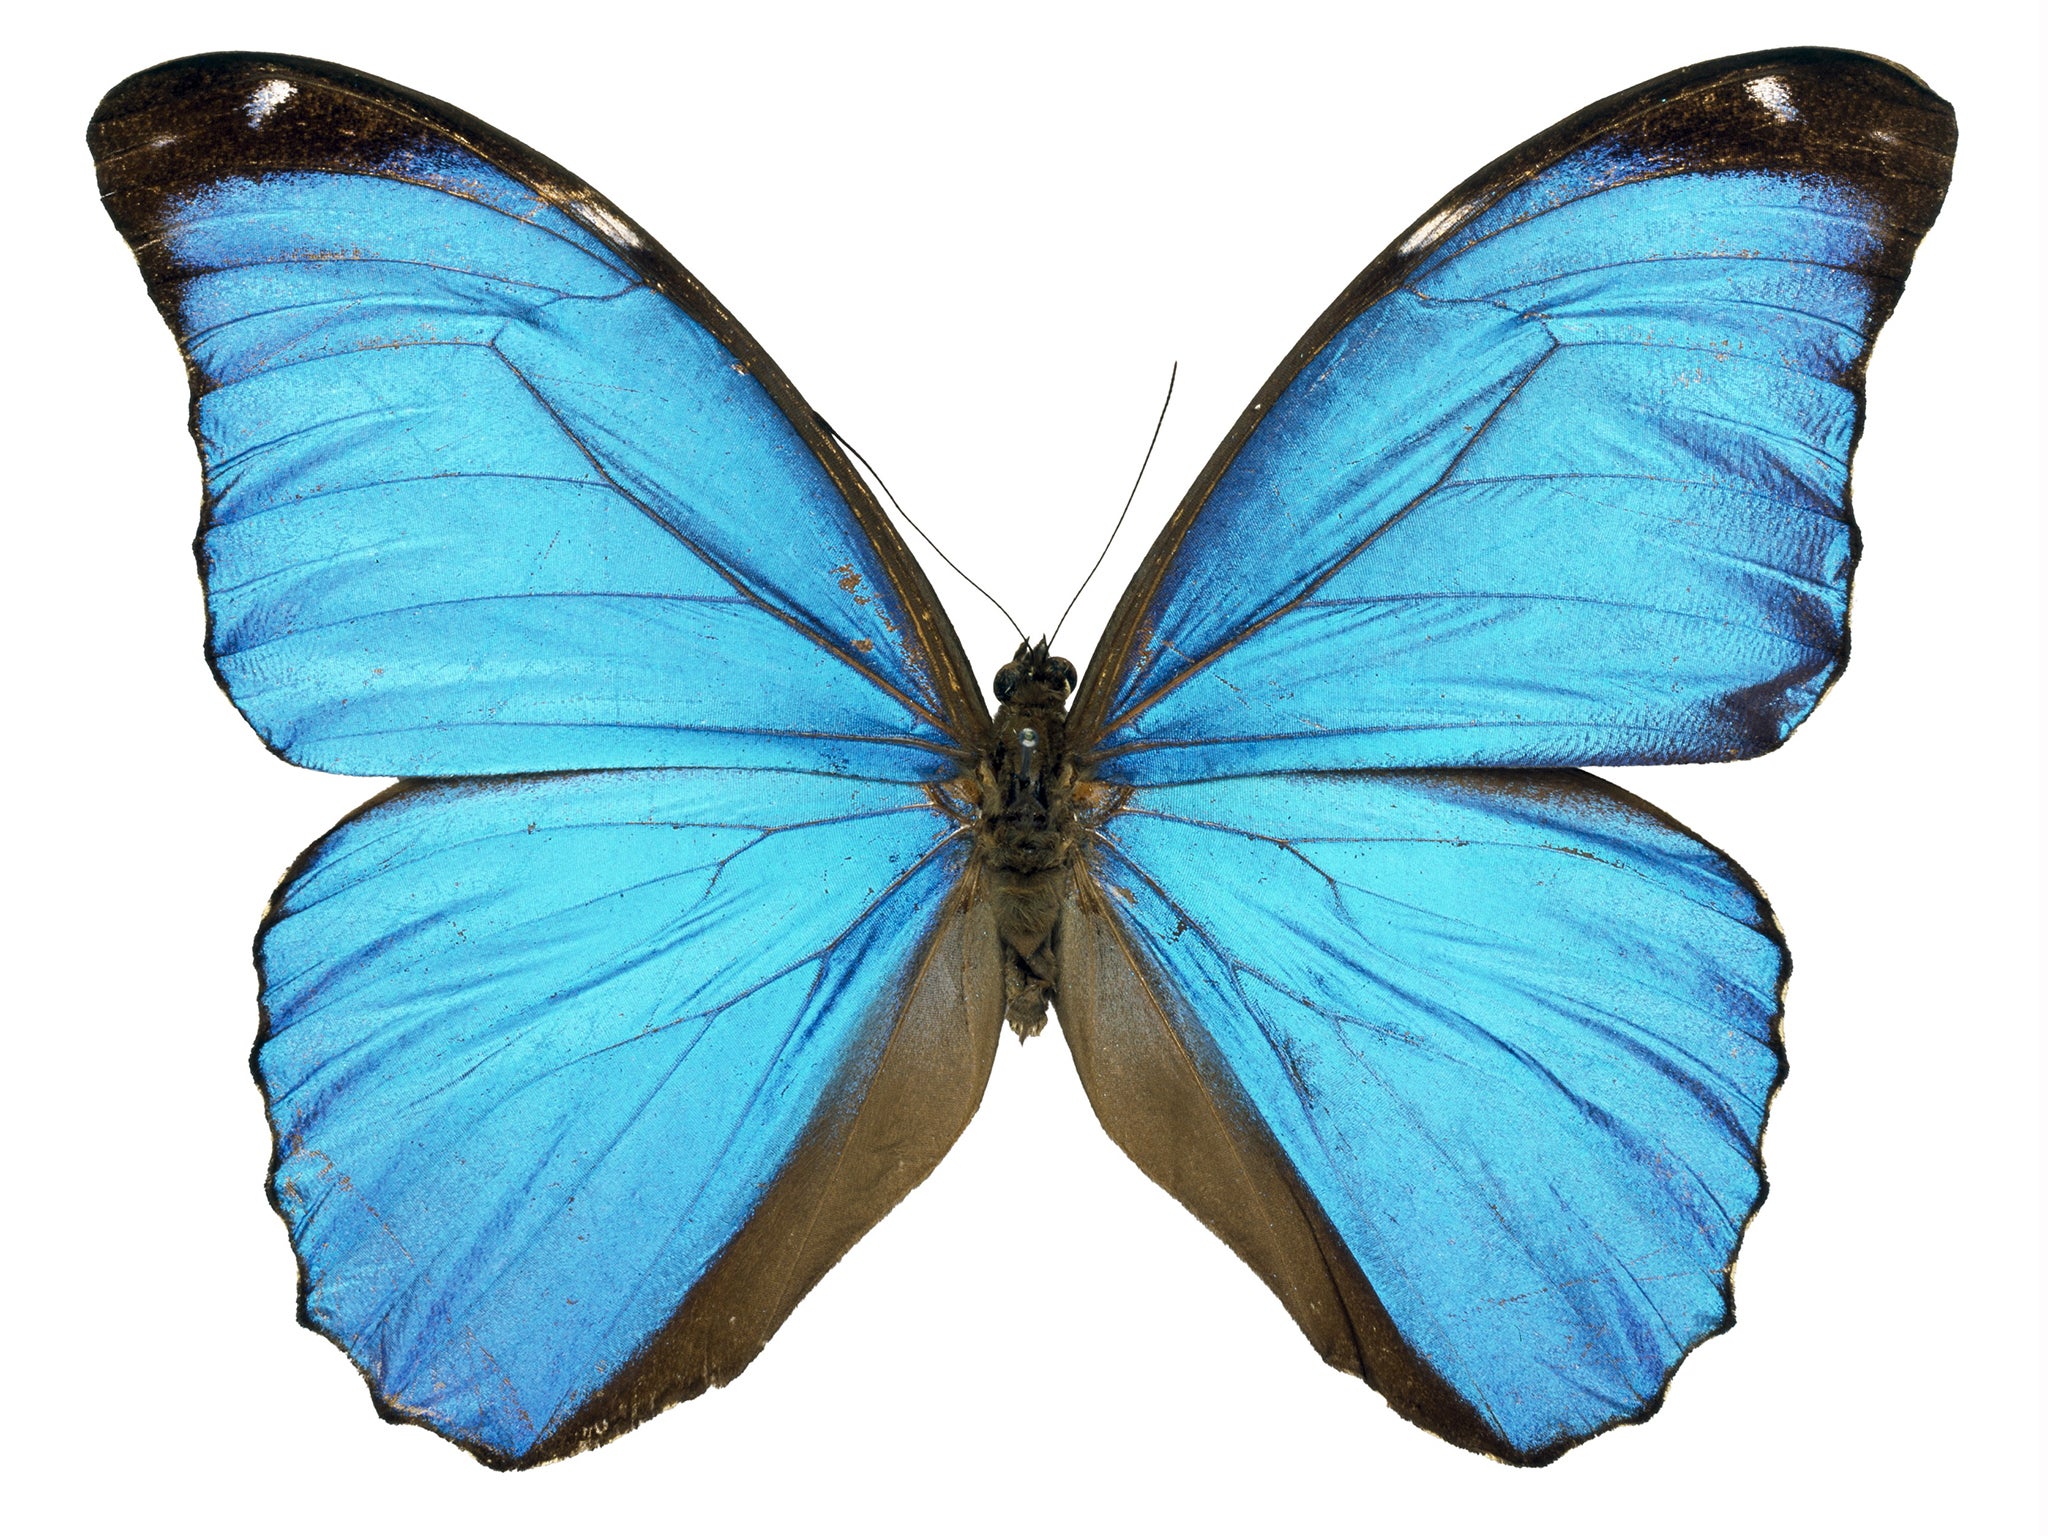 Scientist grows butterfly wing in laboratory